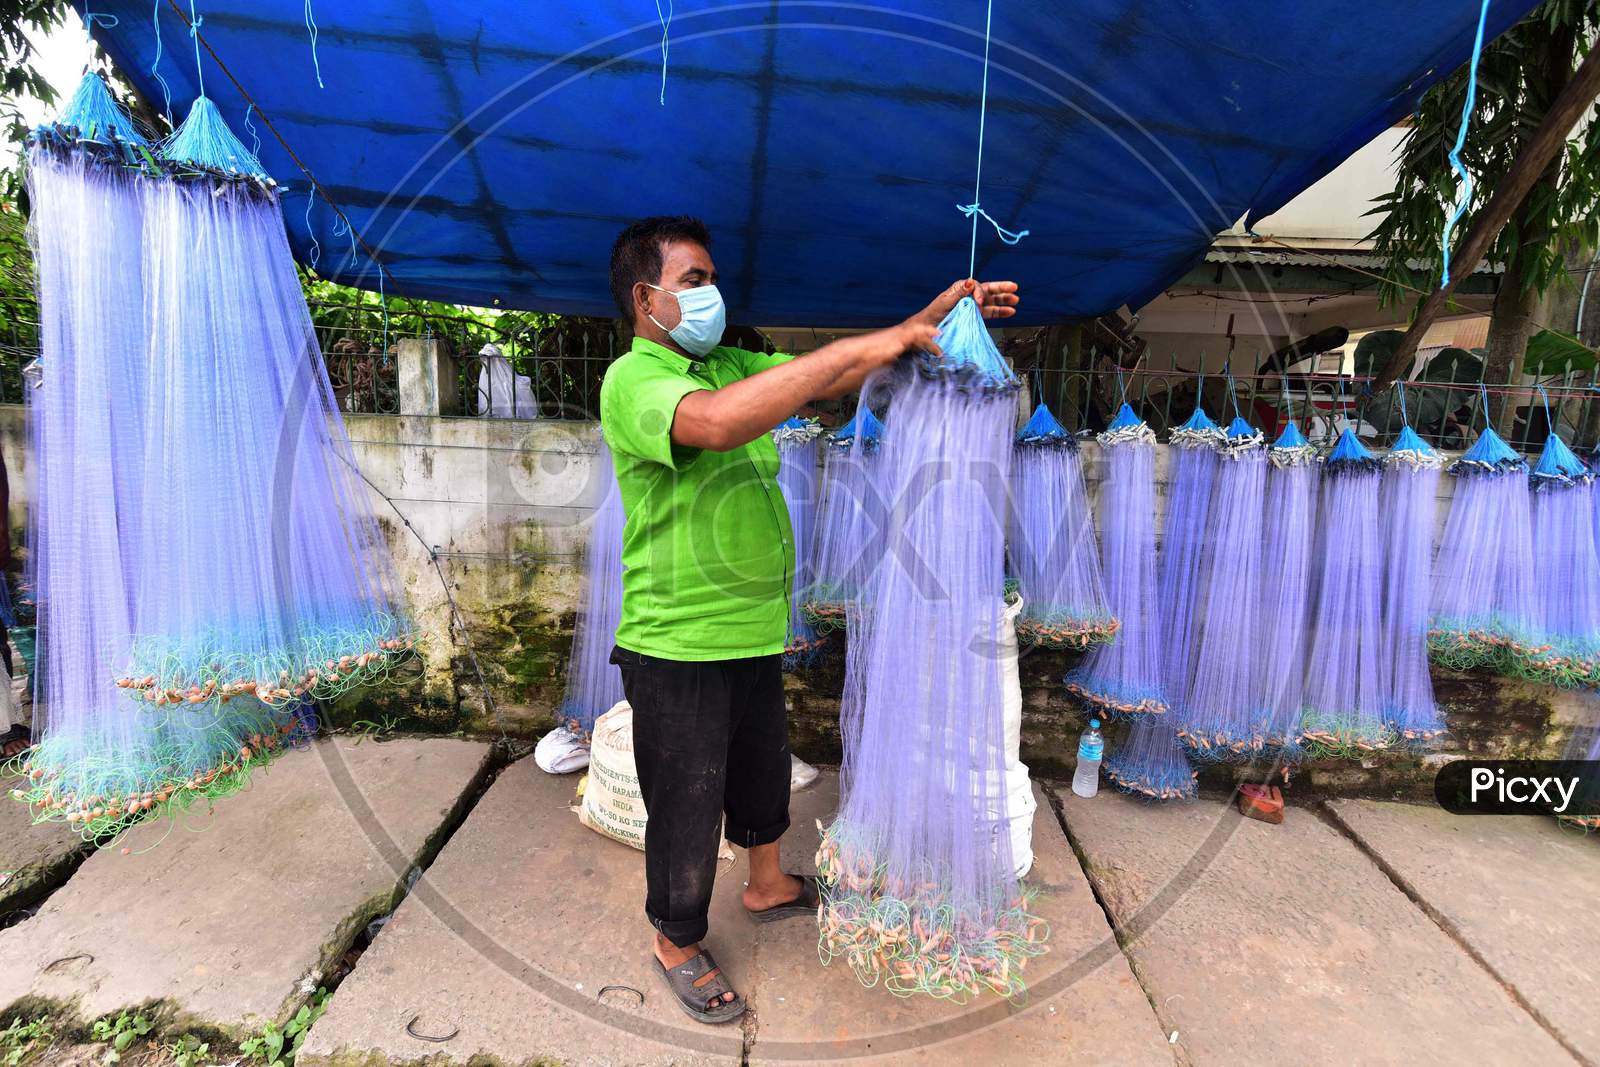 A Vendor Arranges  Fishing Net On His Roadside Shop For Sale During Nationwide Lockdown 5.0 of Coronavirus or COVID-19  In Nagaon District In The Northeastern State Of Assam, India On June 9, 2020.